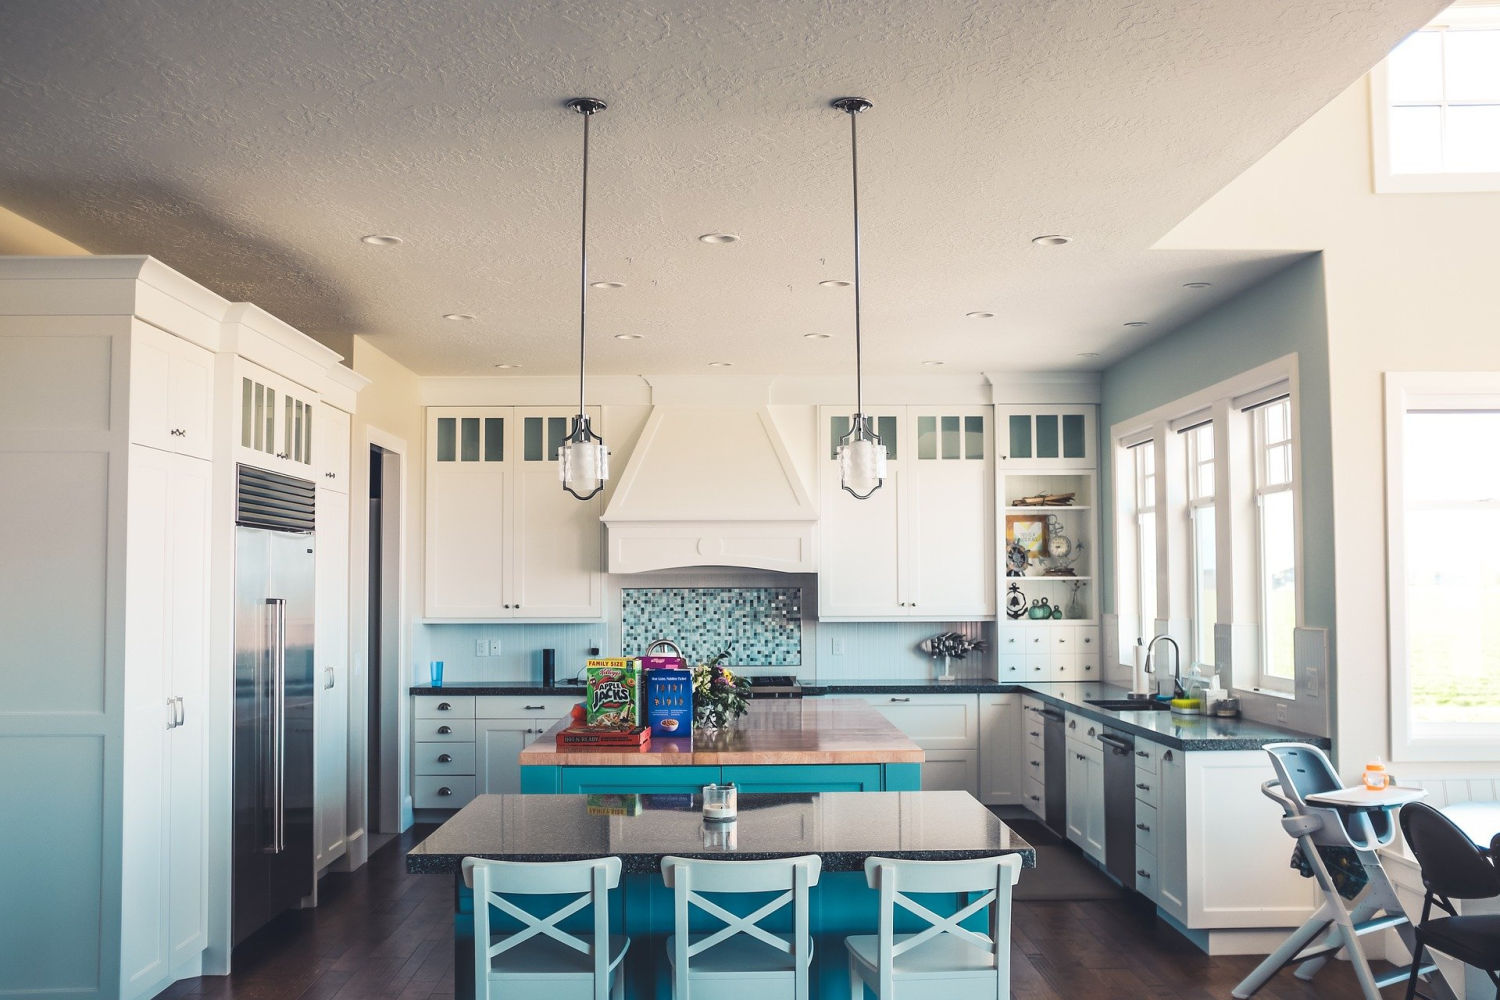 5 Kitchen Design Tools to Use When Planning Your Kitchen Remodel